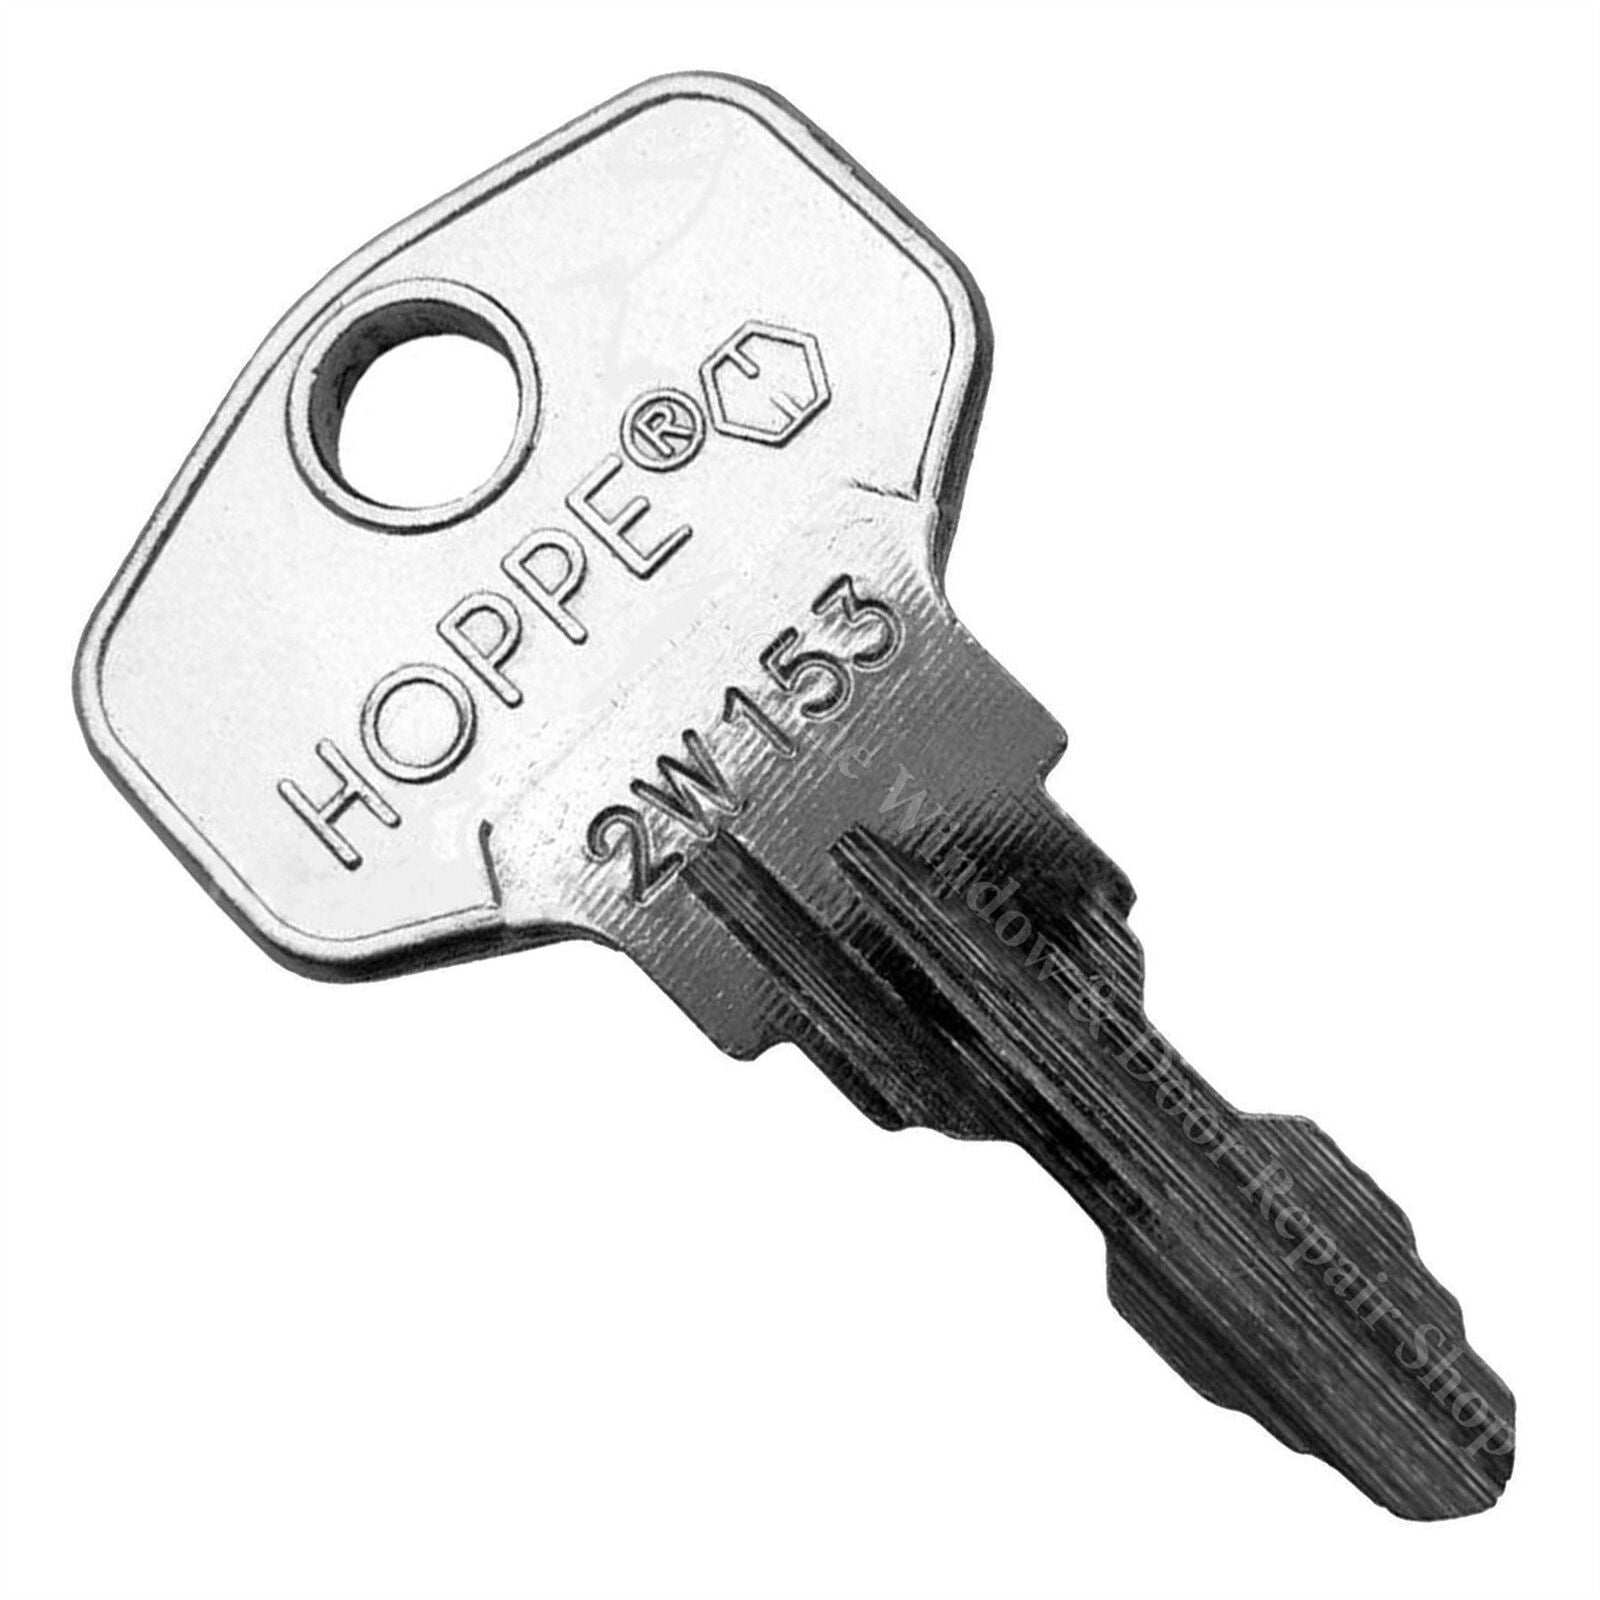 Replacement Hoppe Upvc Window Handle Key 2W153 – Commercial Hardware